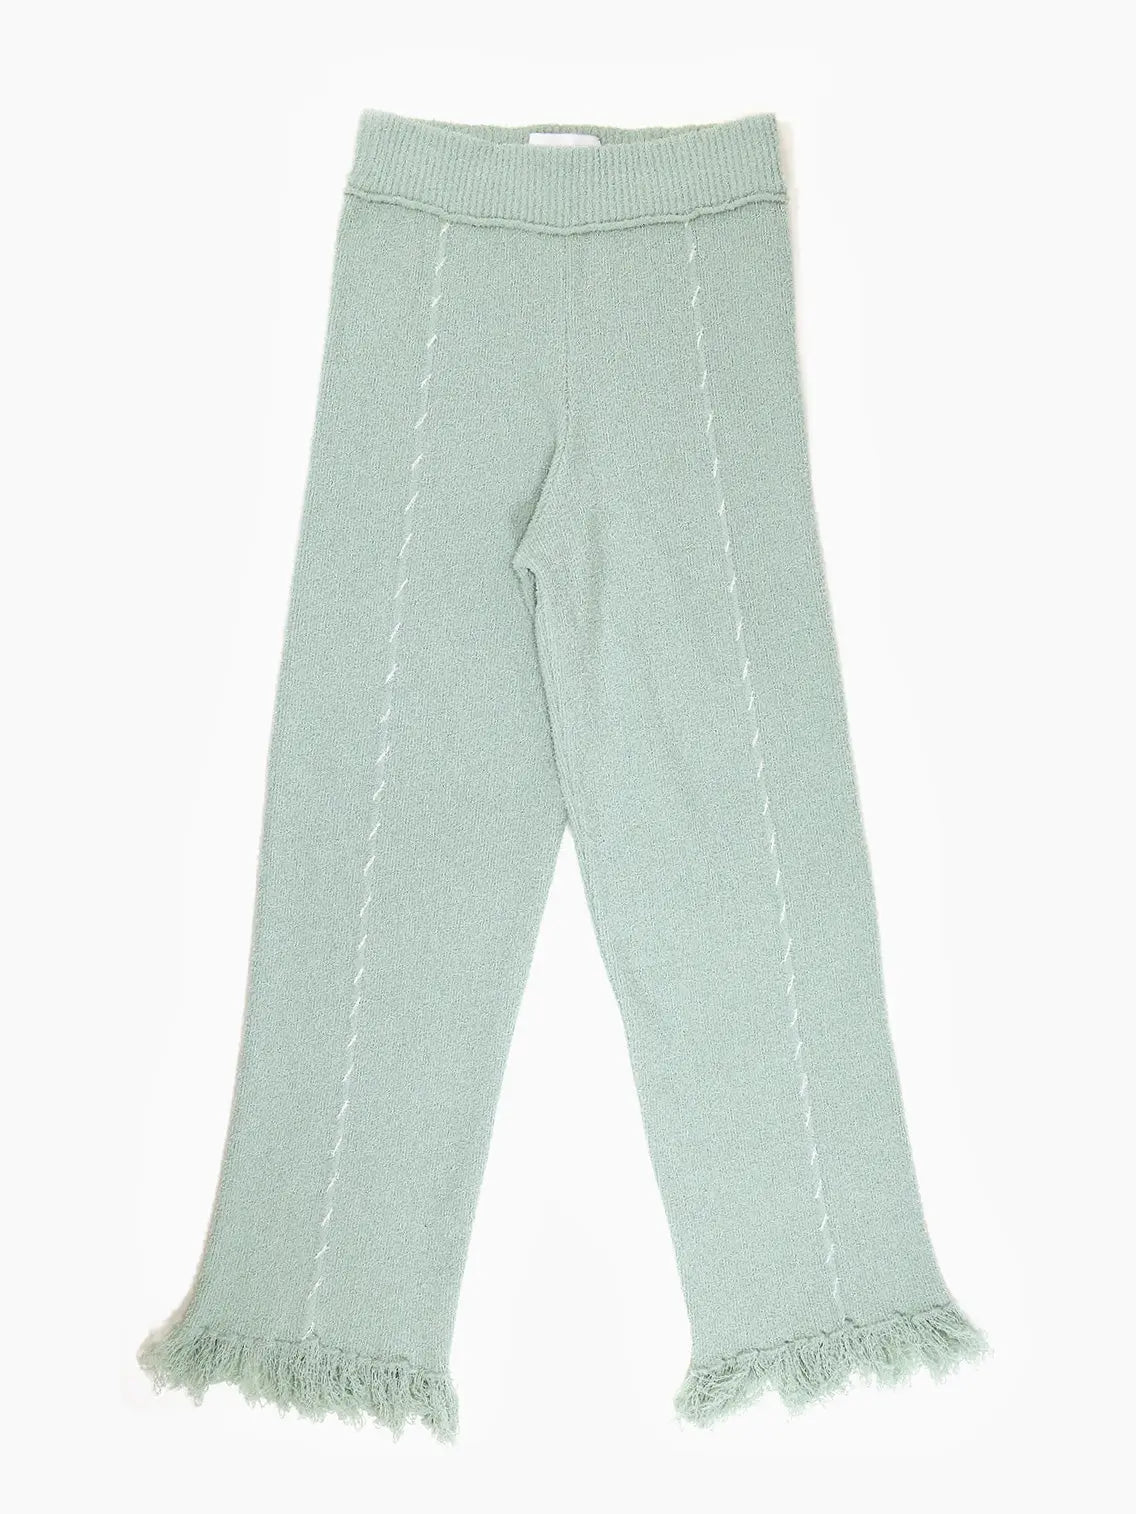 A pair of Hoki Pants Green by Rus with a ribbed waist and fringed hems, available at Bassalstore in Barcelona. The pants also feature vertical knitted seams along the legs.